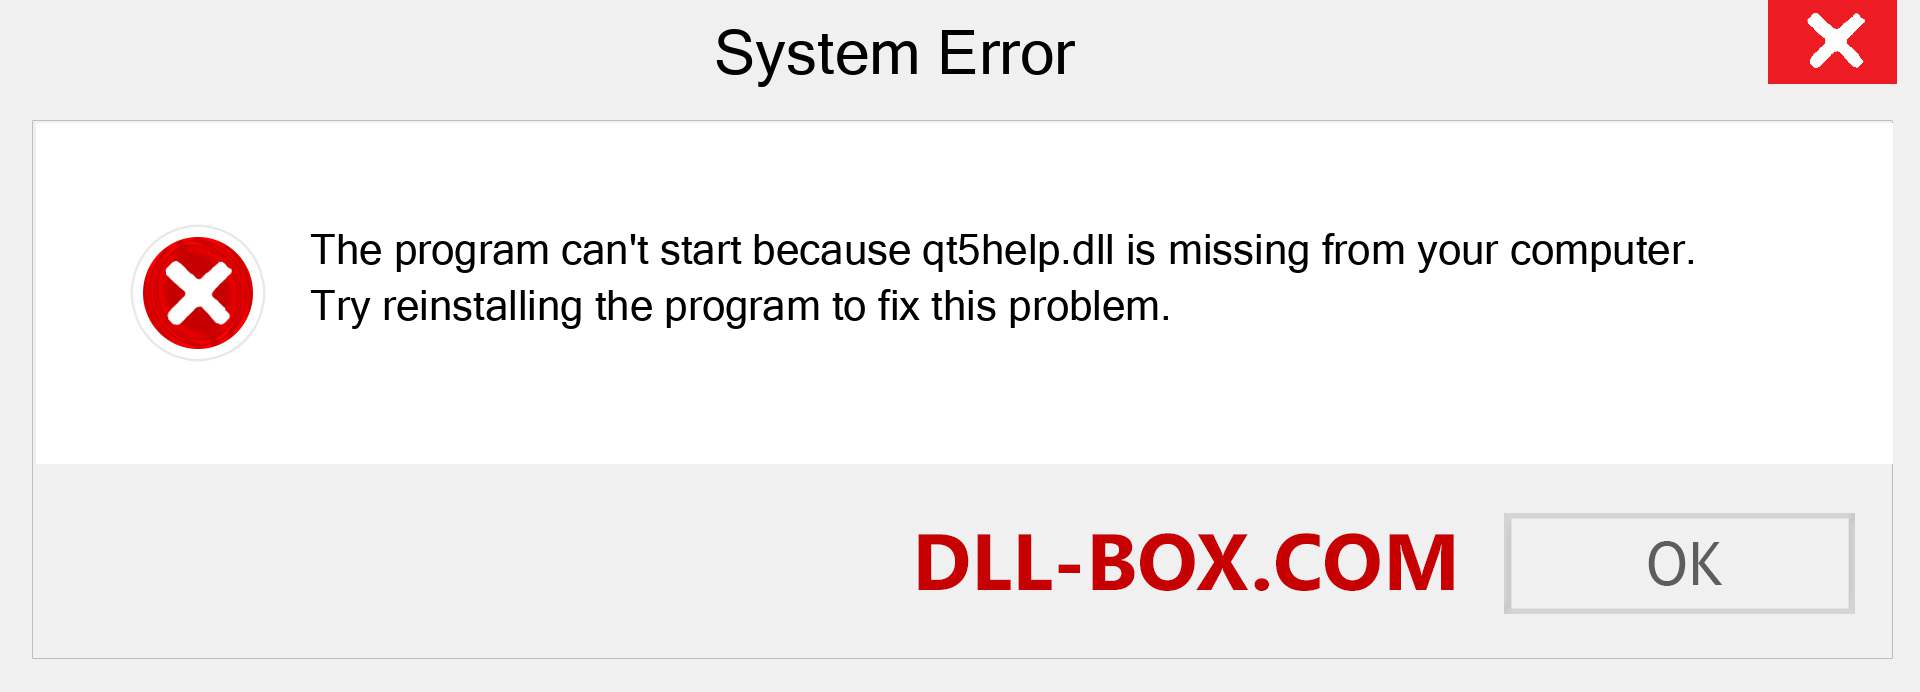  qt5help.dll file is missing?. Download for Windows 7, 8, 10 - Fix  qt5help dll Missing Error on Windows, photos, images